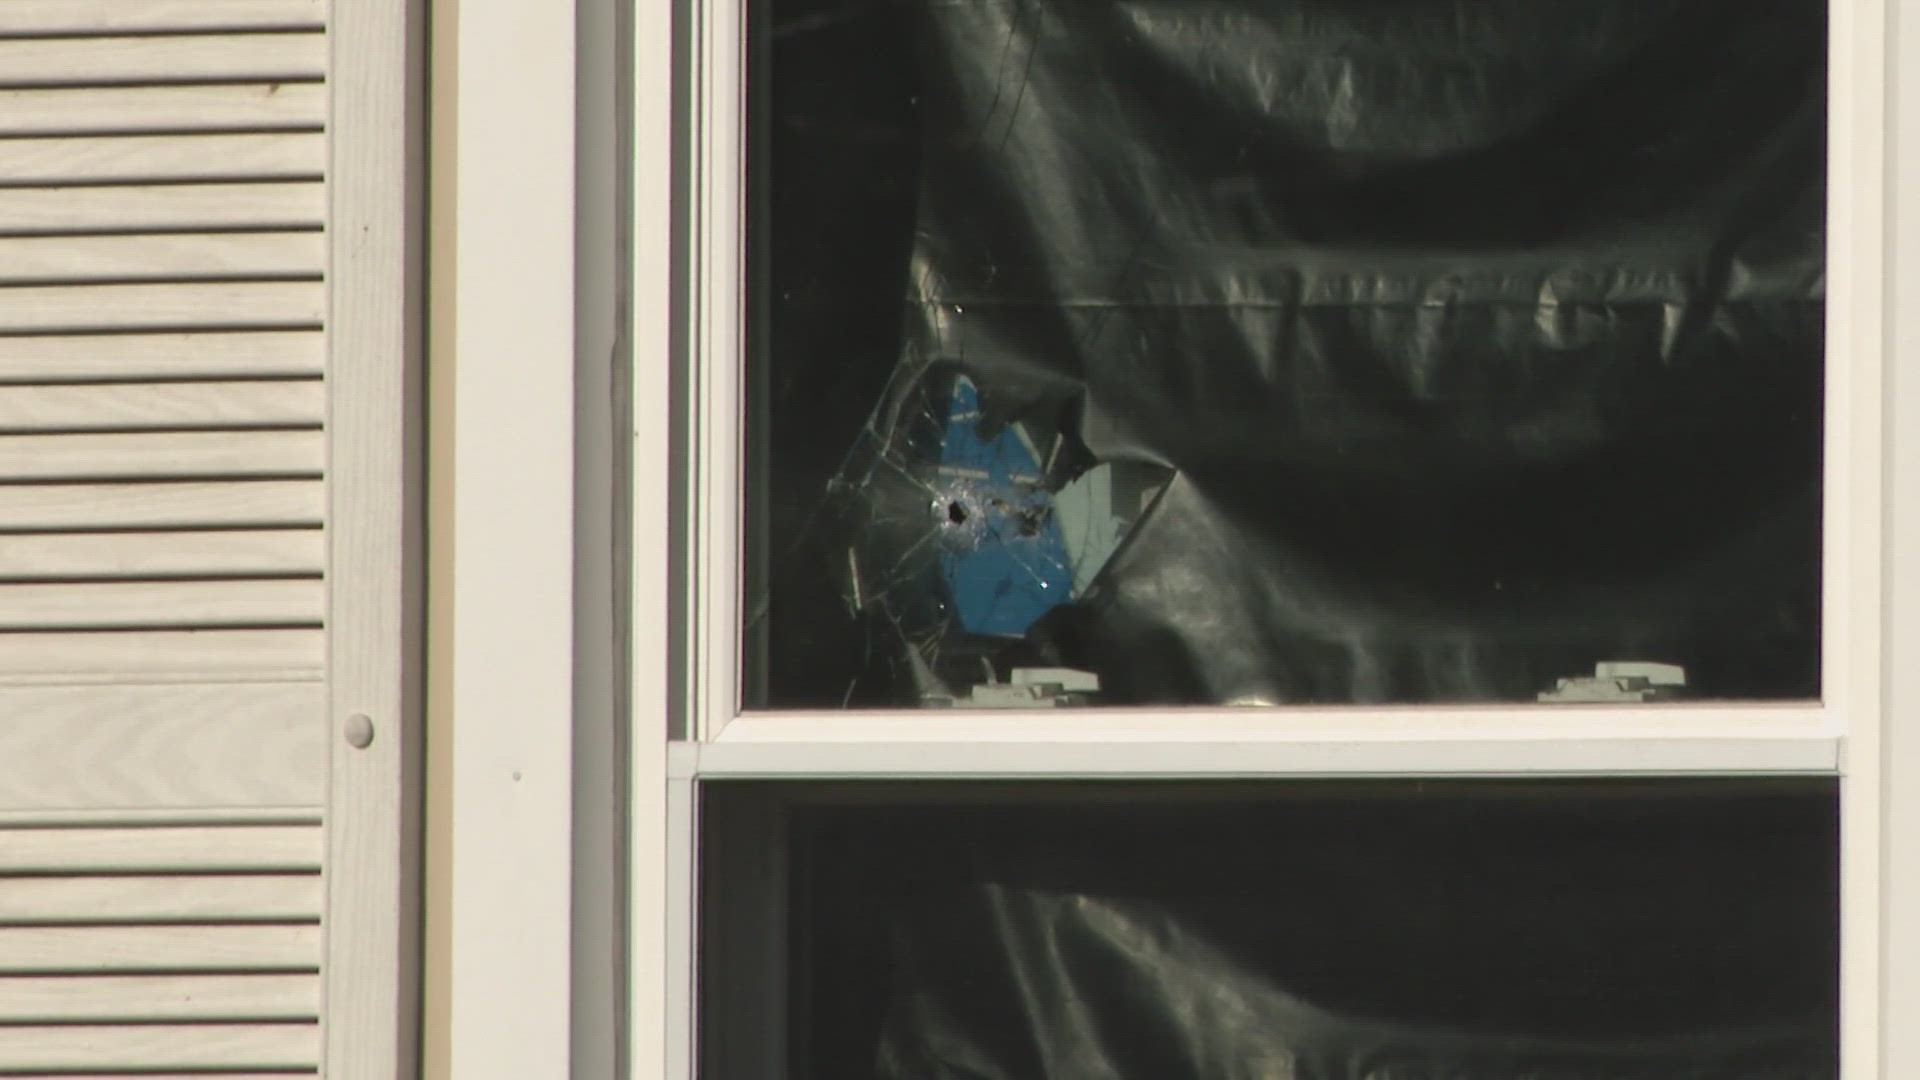 The police report states officers found a boy who'd been hit by a bullet when someone shot up the house.